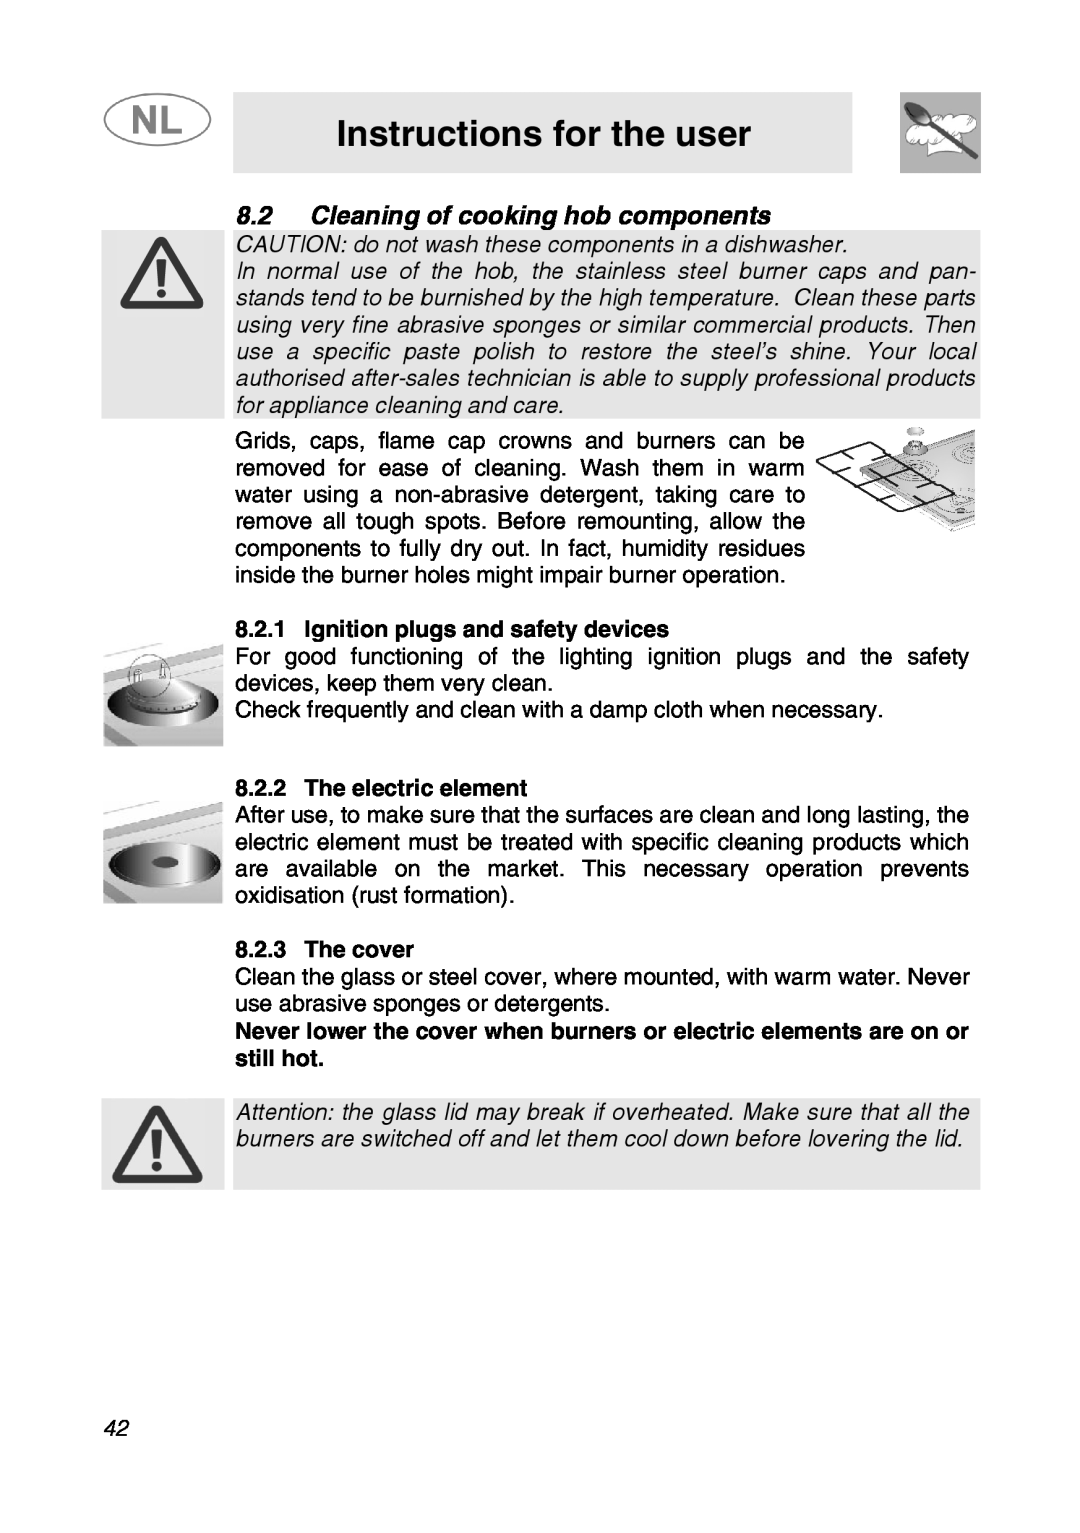 Smeg GKC95-3 manual Cleaning of cooking hob components, Ignition plugs and safety devices, The electric element, The cover 